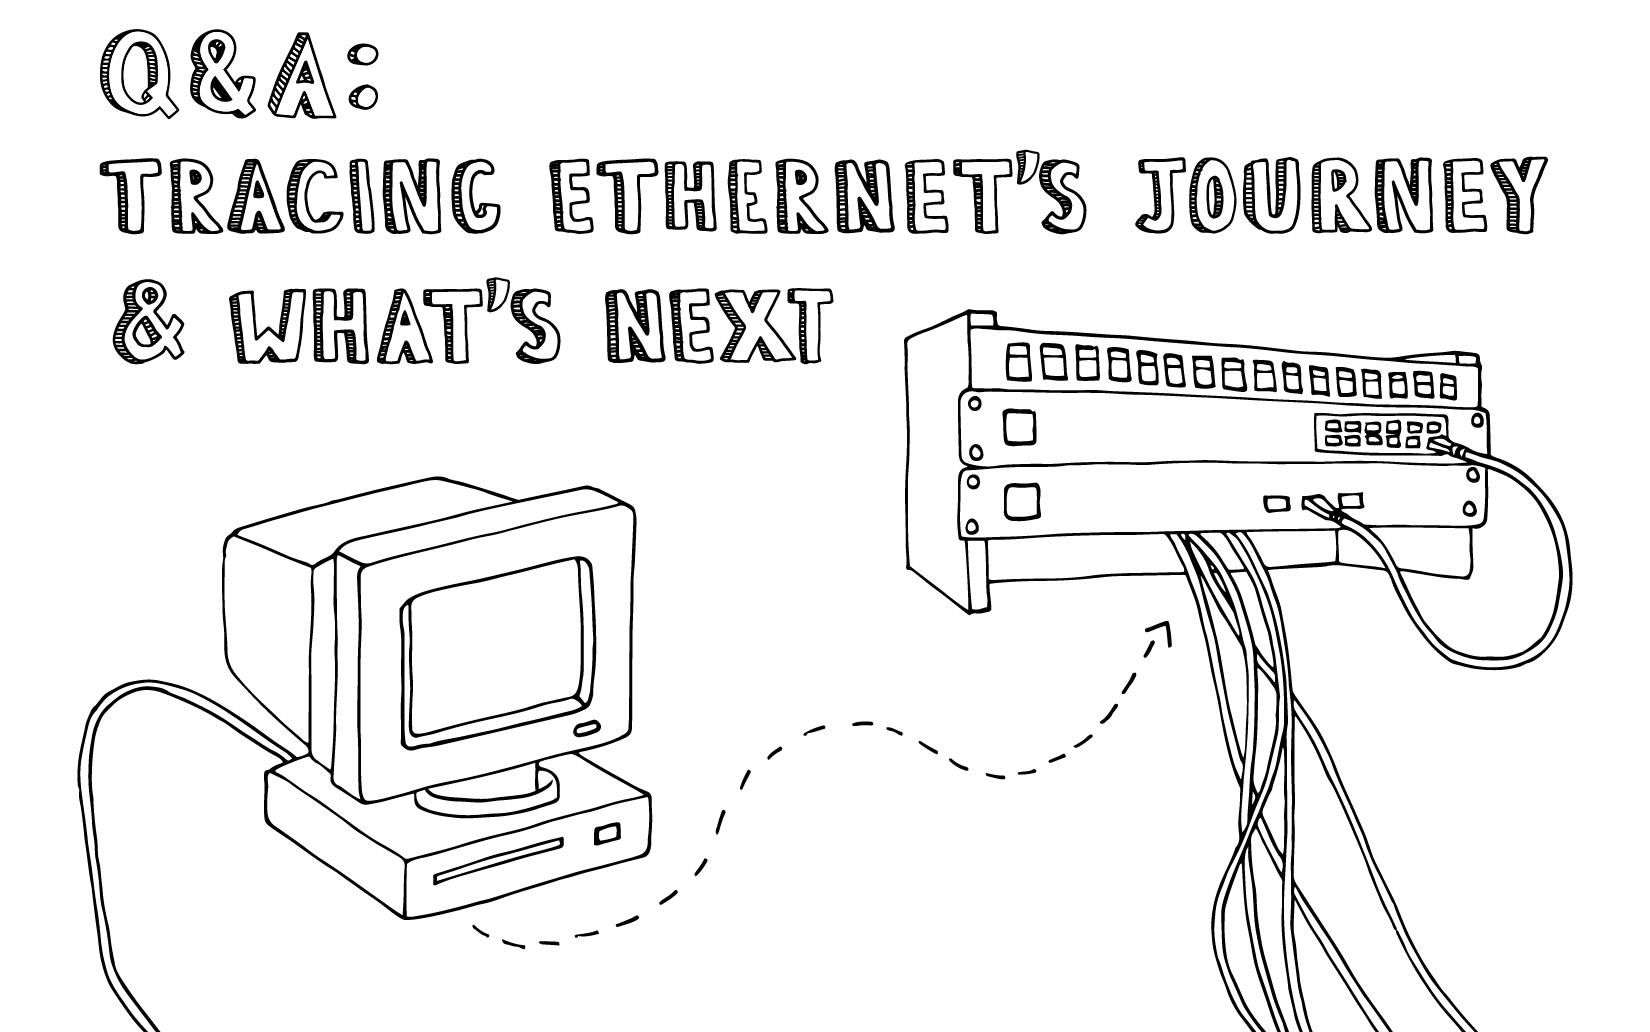 Q&A: Tracing Ethernet's Journey and What's Next